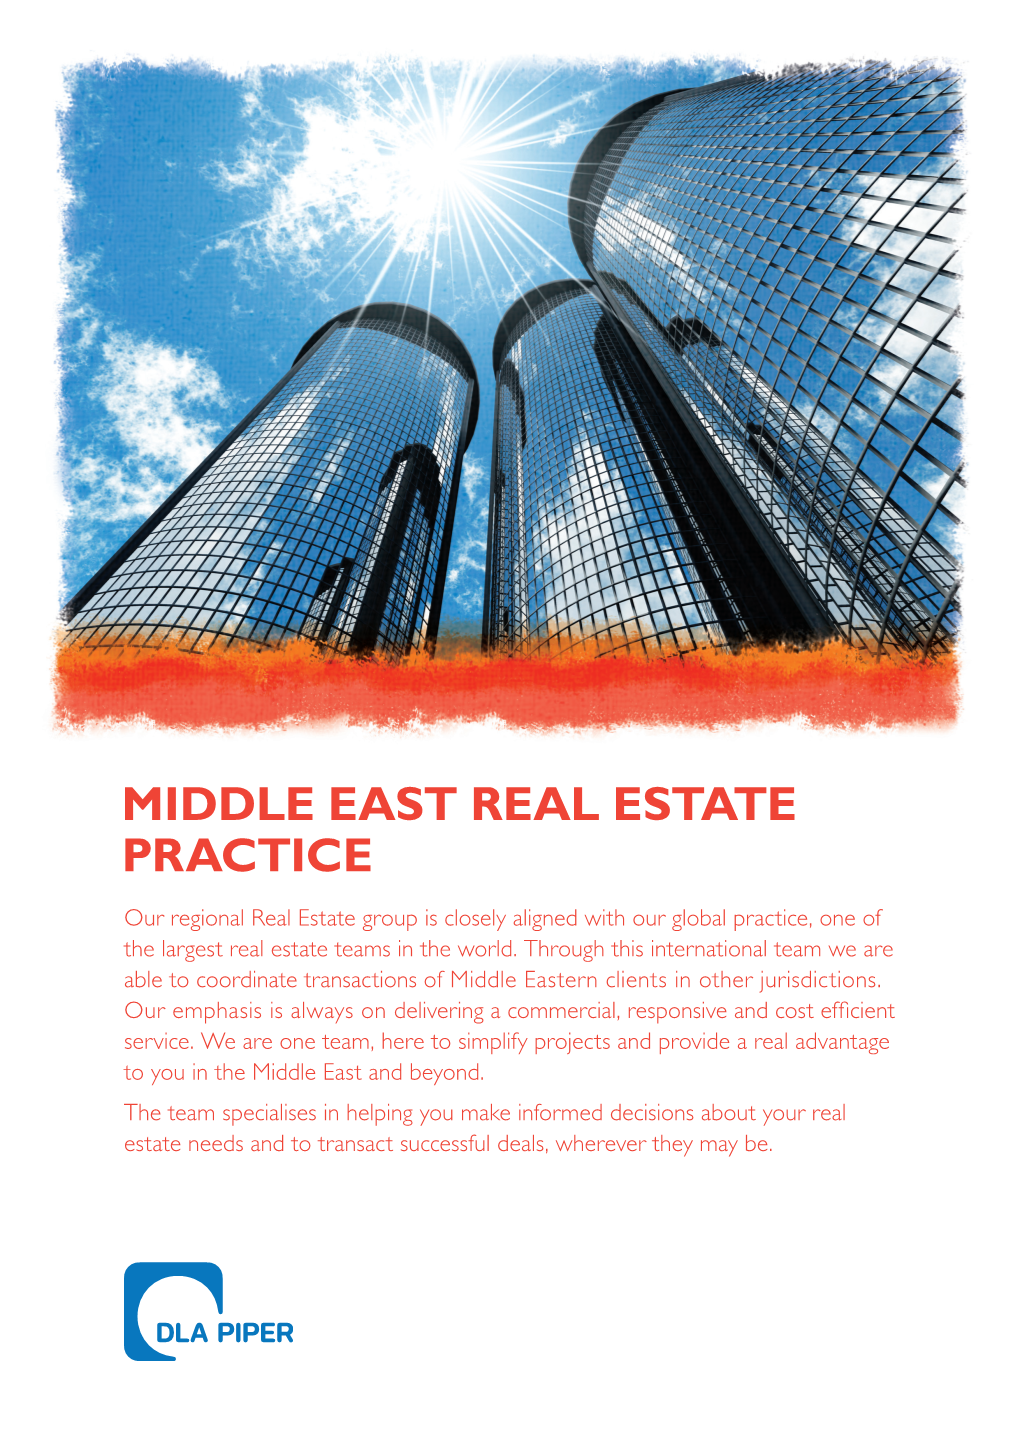 Read About Our Middle East Real Estate Practice